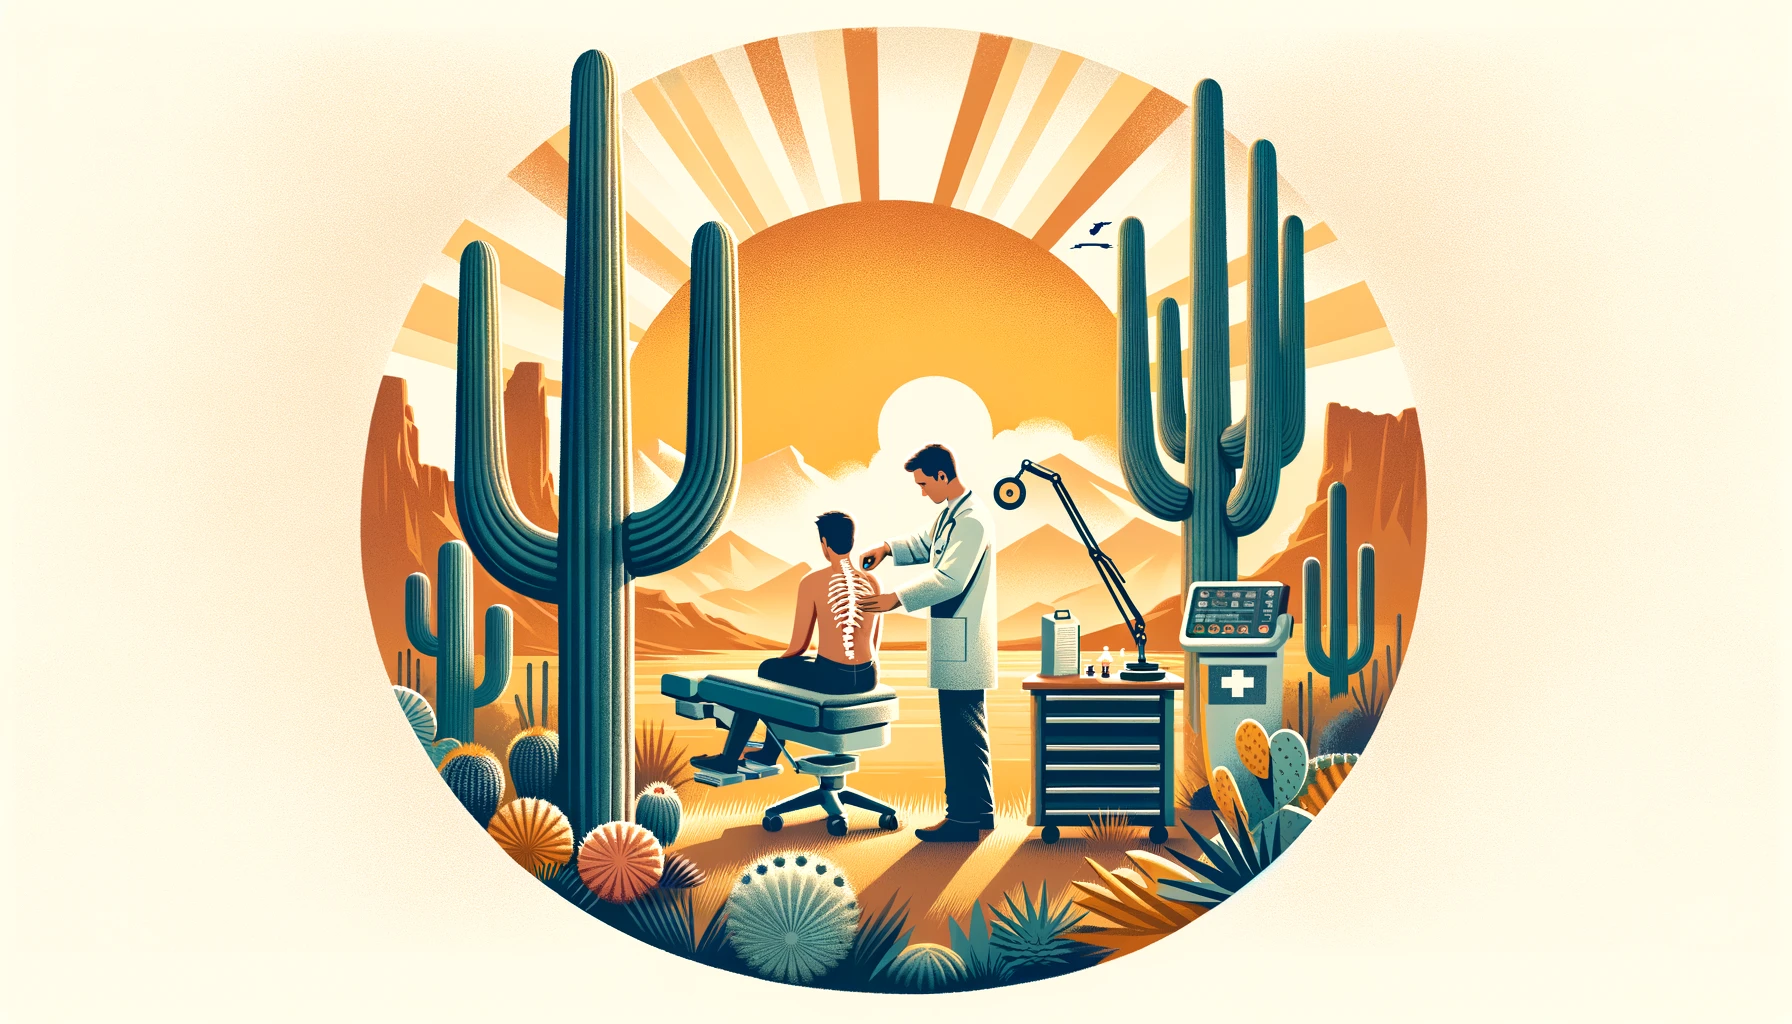 "A horizontal image showcasing a chiropractic session with a practitioner adjusting a patient's spine, set against a serene Phoenix, Arizona backdrop, featuring the silhouette of Camelback Mountain and saguaro cacti